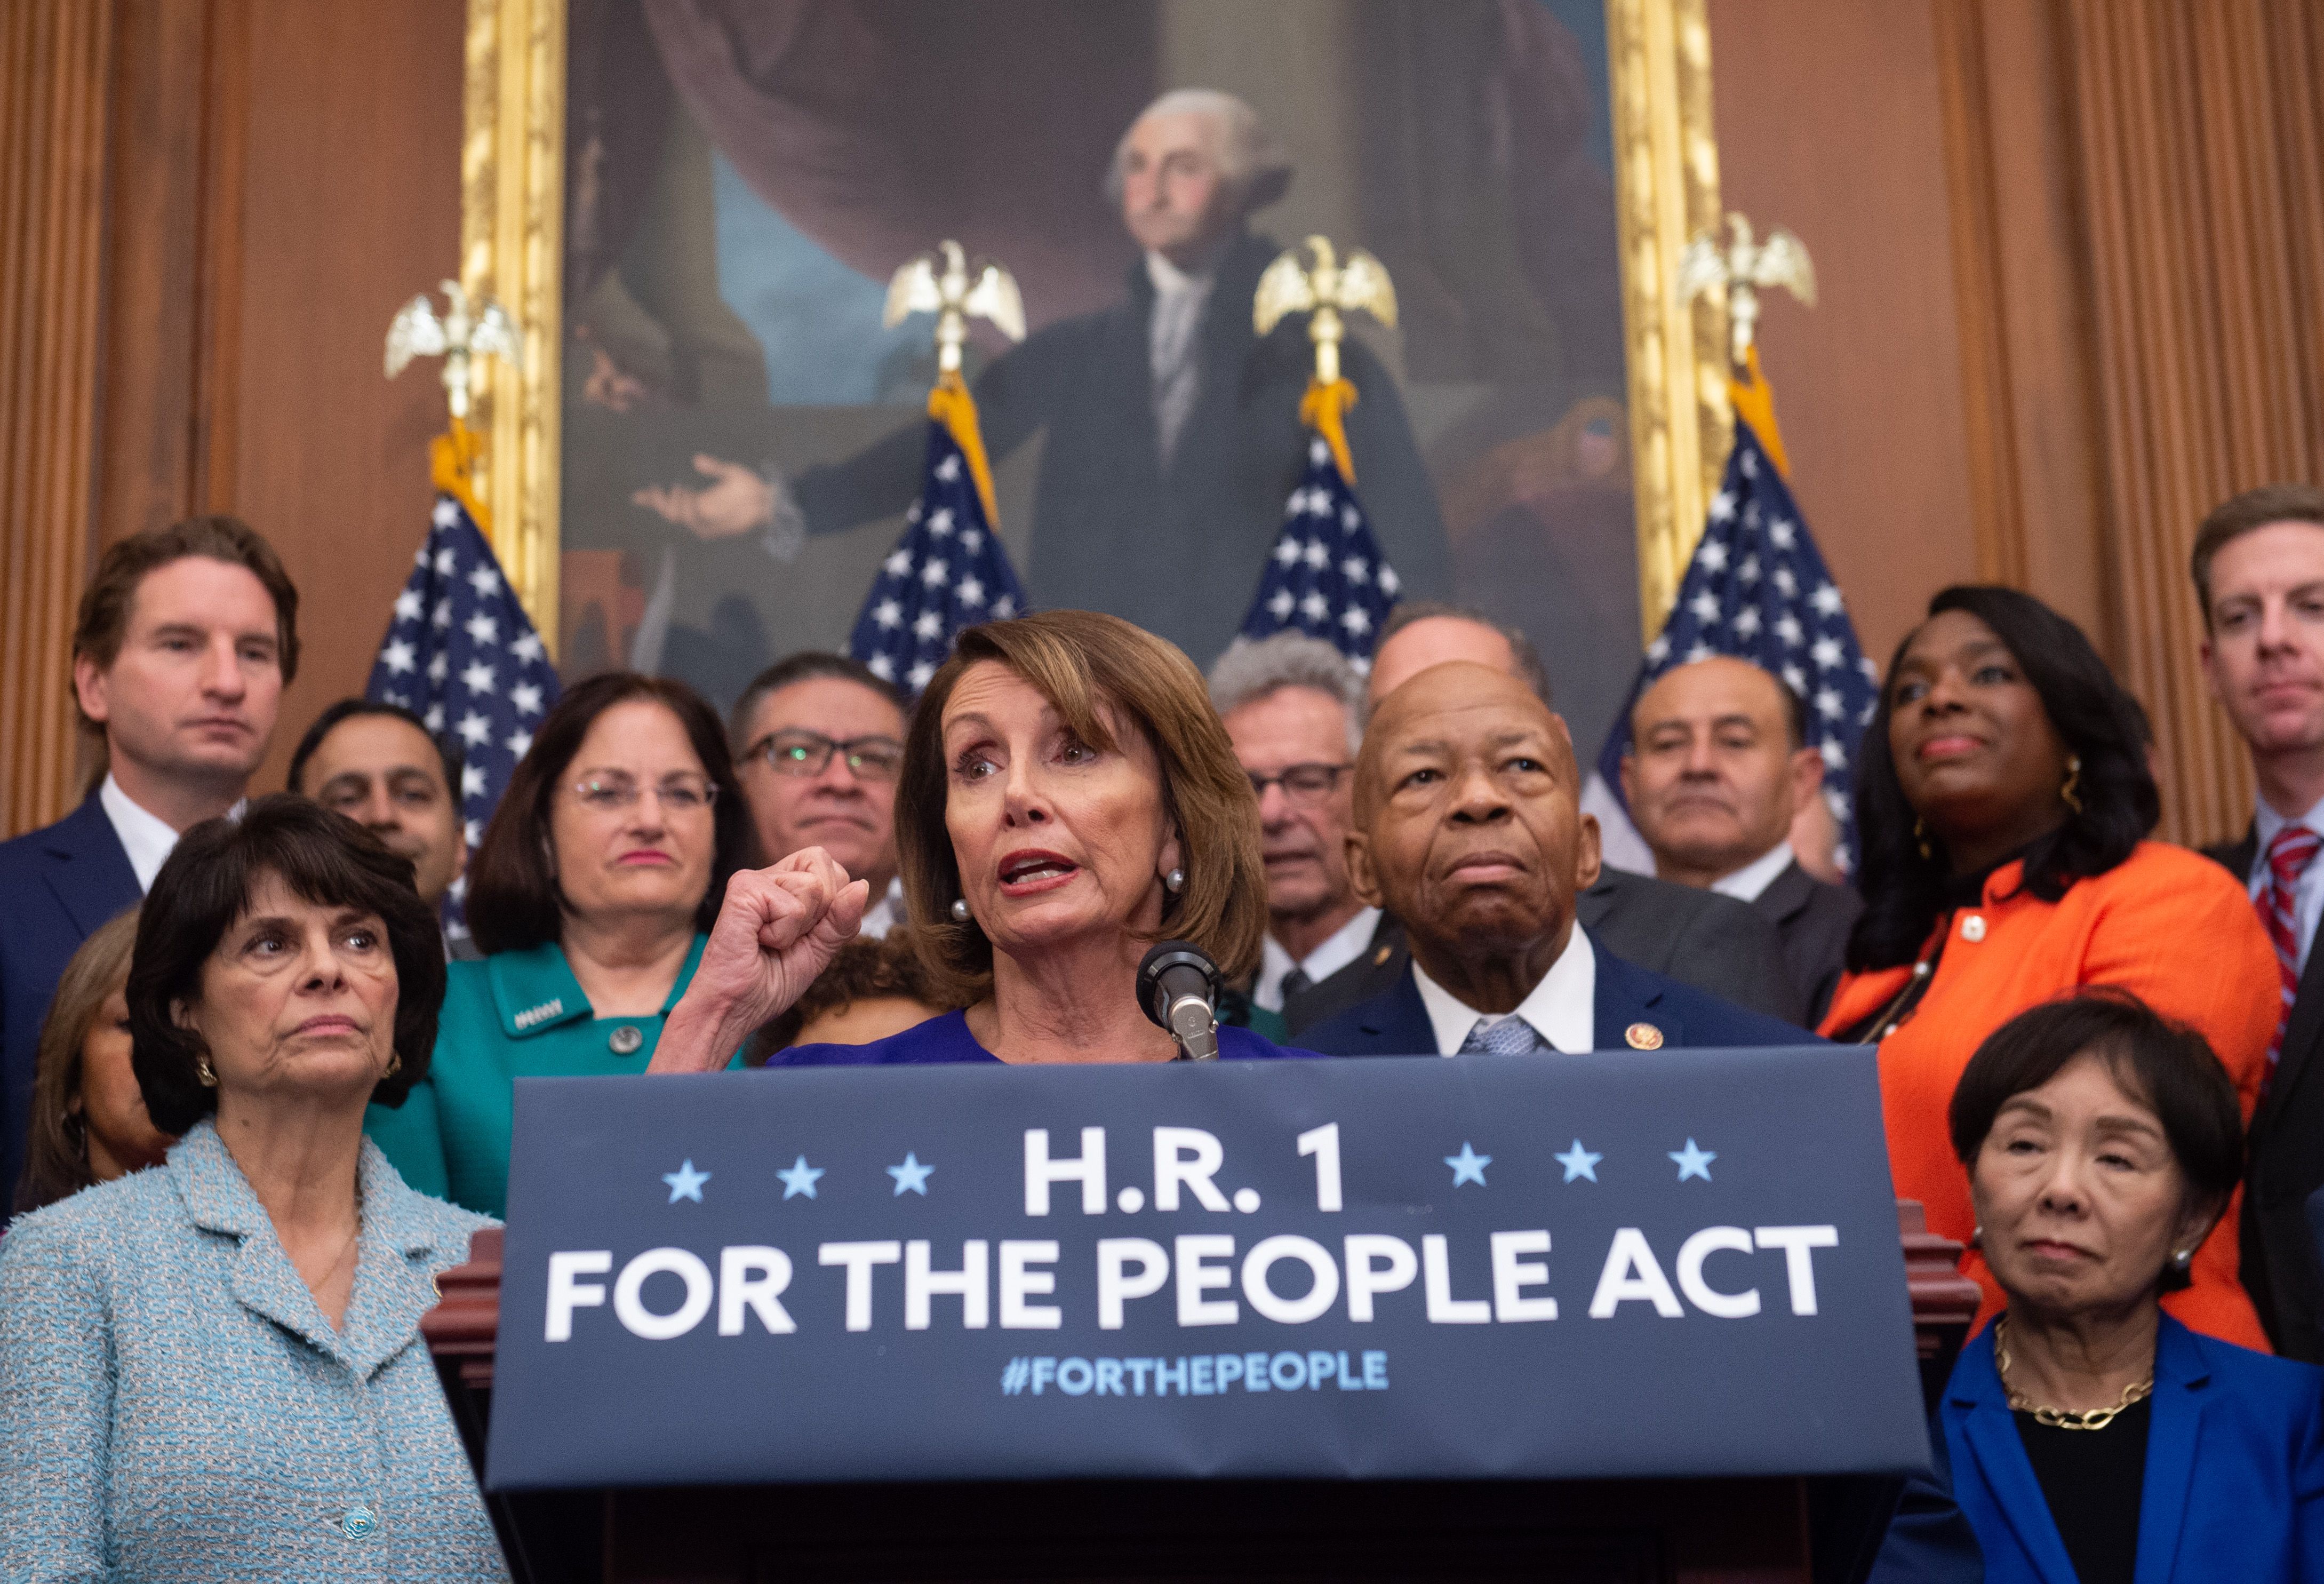 US Speaker of the House Nancy Pelosi (C), Democrat of California, speaks alongside Democratic members of the House about H.R.1, the "For the People Act," at the US Capitol in Washington, DC, January 4, 2019. - Democrats announced their first piece of legislation to reform voting rights provisions, ethics reforms and a requirement that presidential candidates release 10 years of tax returns. (Photo by SAUL LOEB / AFP) (Photo credit should read SAUL LOEB/AFP/Getty Images)